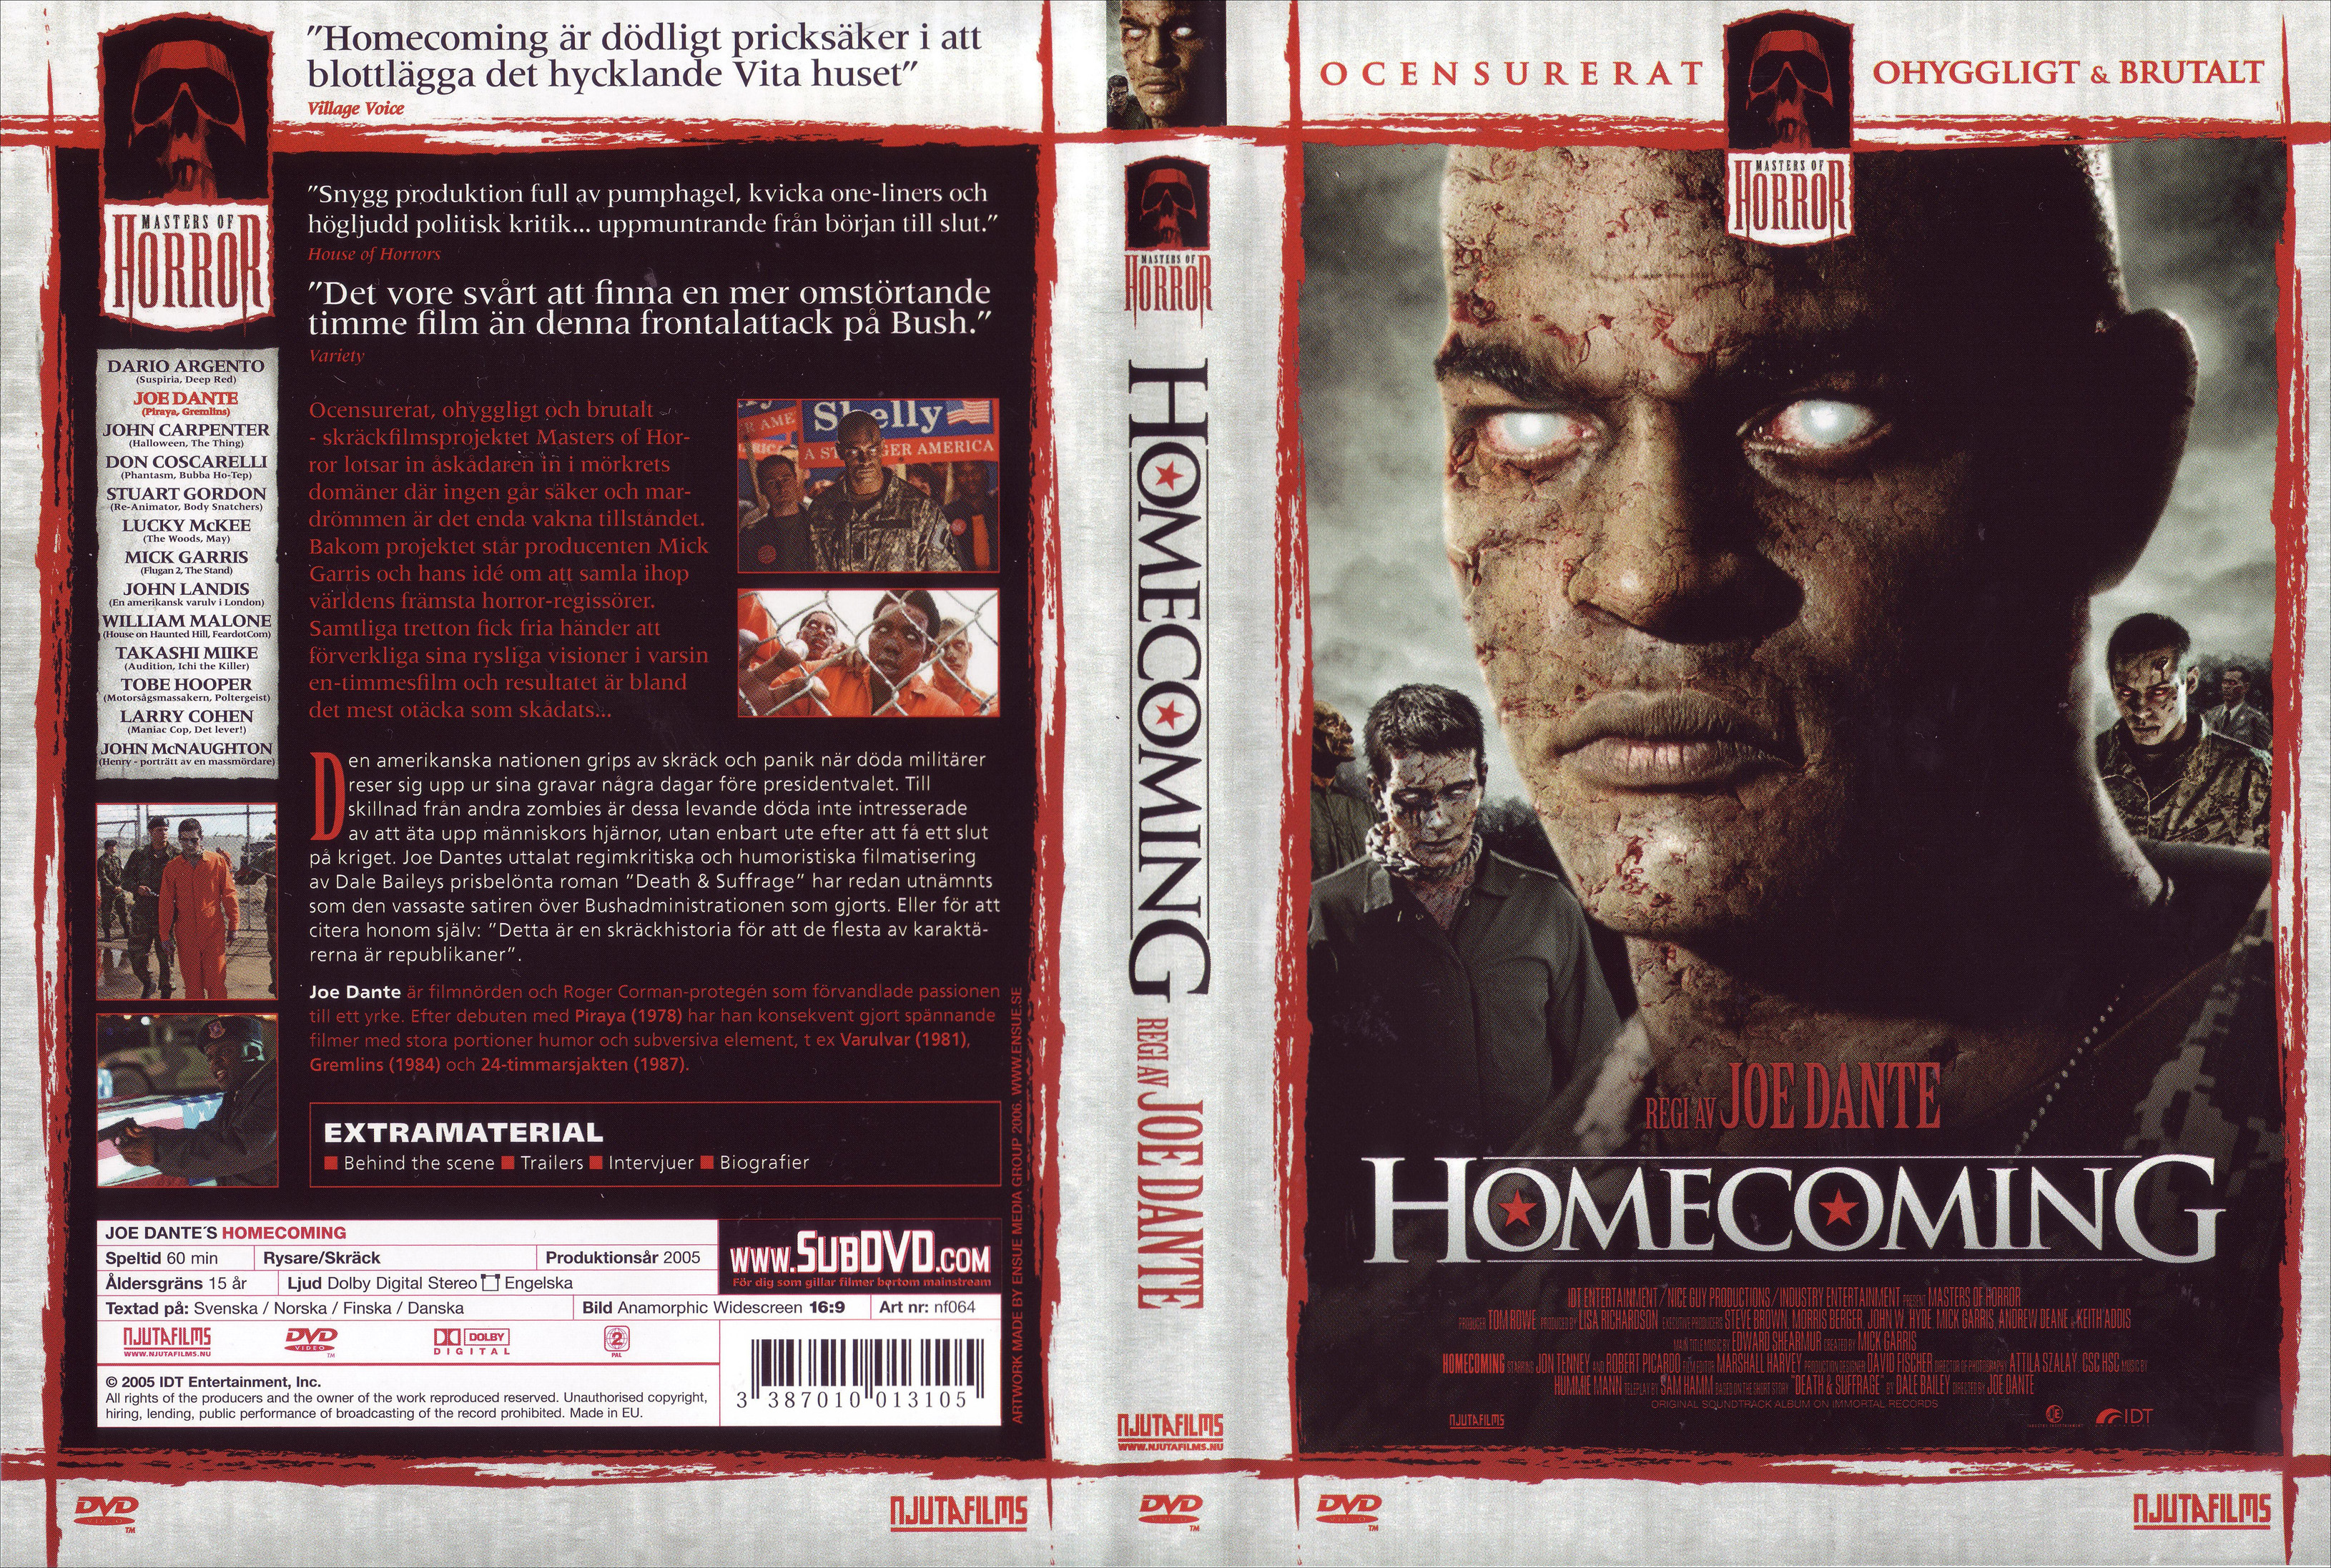 masters of horror - homecoming - front back.